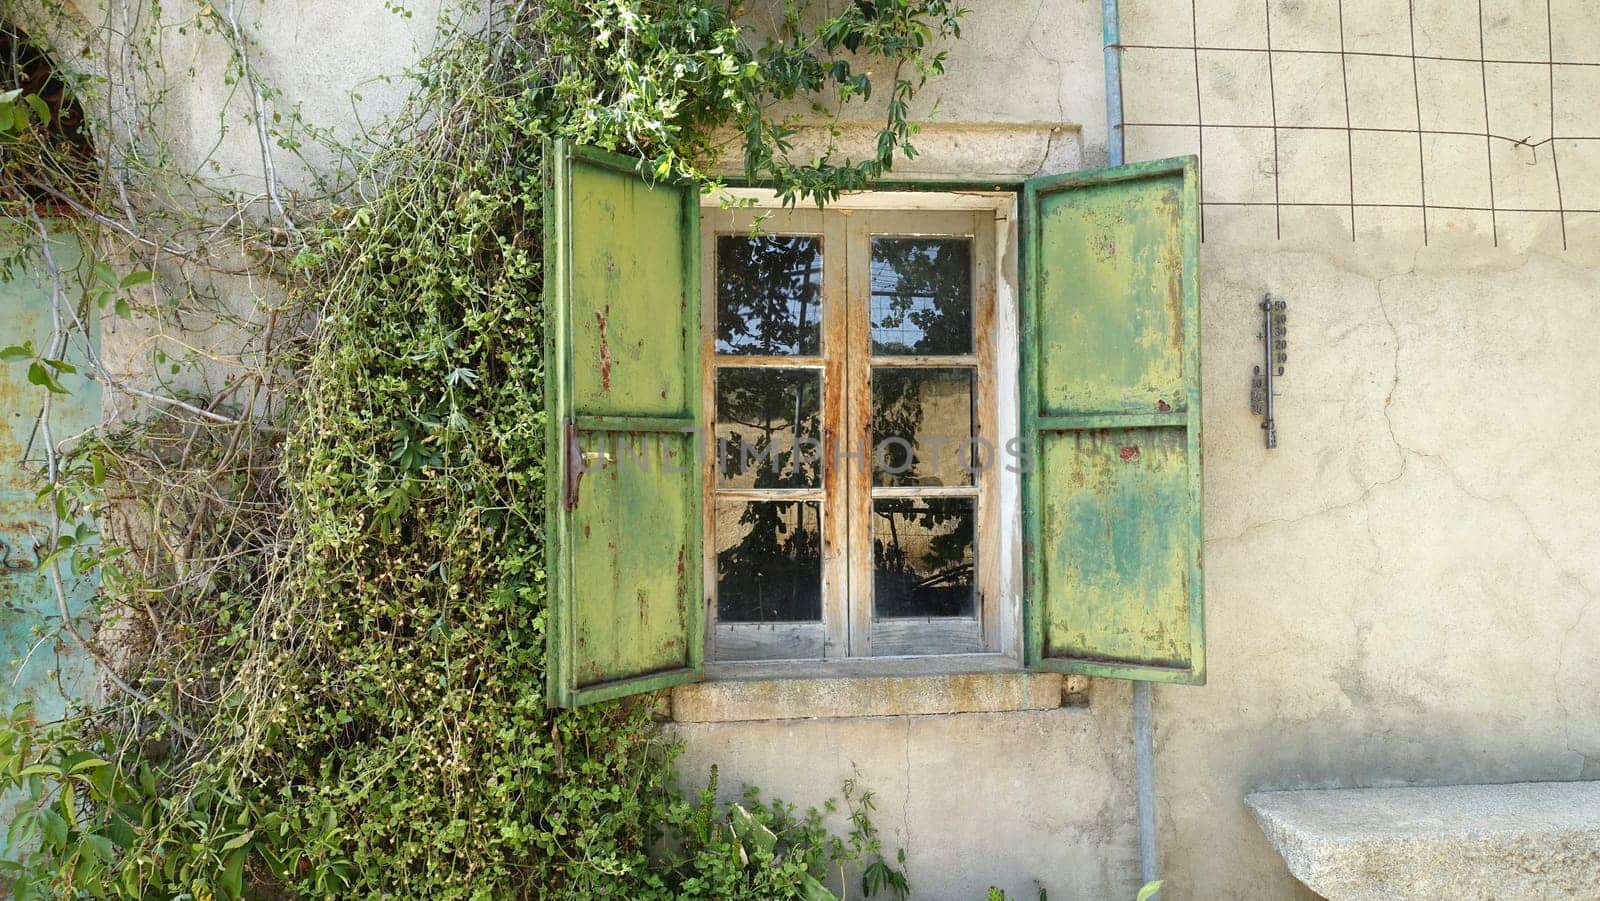 The window with metal shutters of an ancient house in the countryside. by Jamaladeen